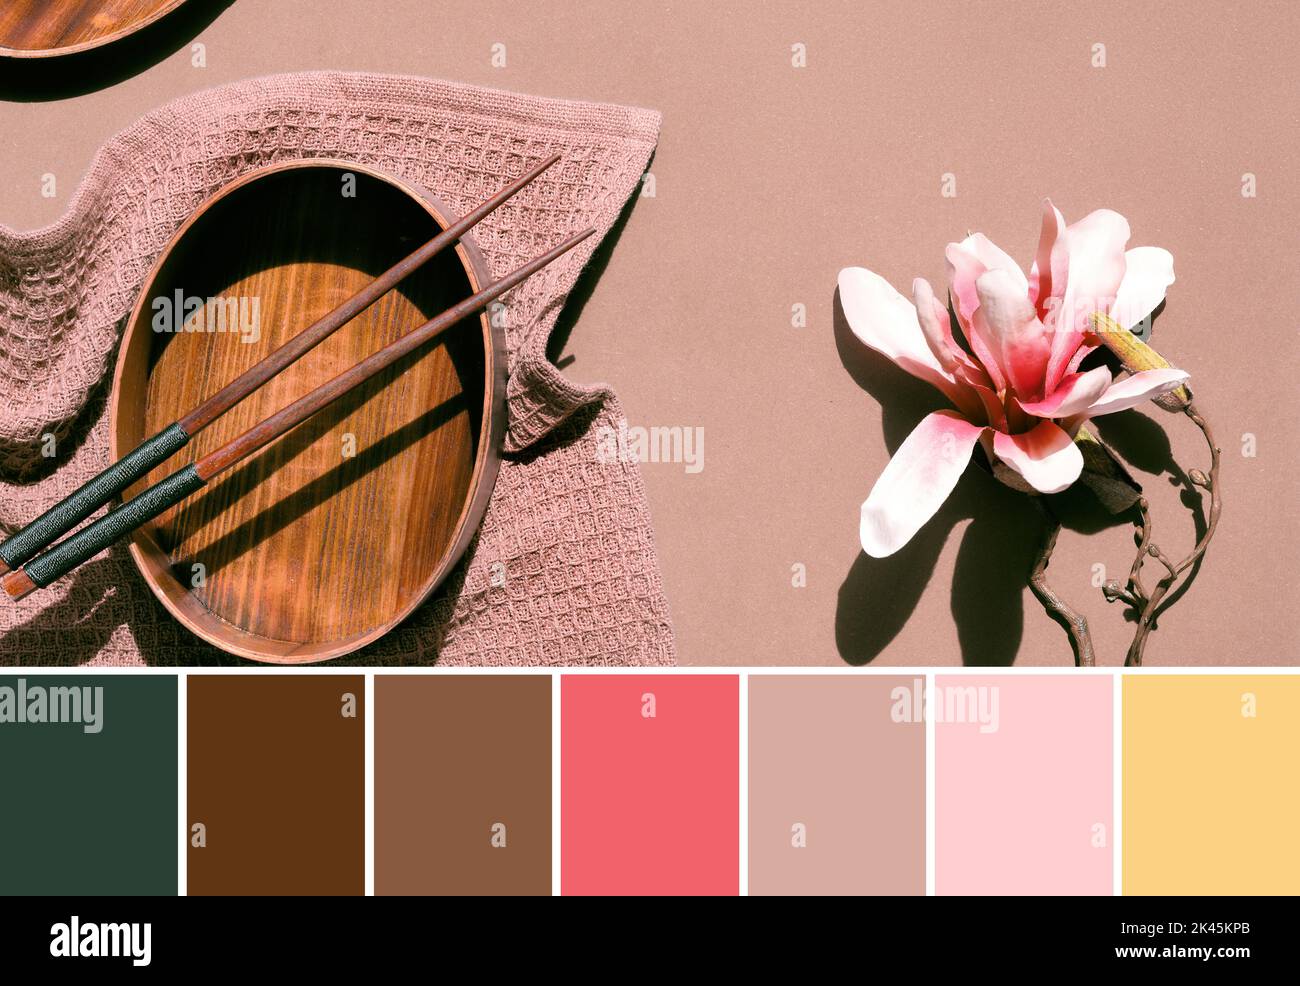 Color matching palette from image of wooden packed lunch box set. Lunch box with chopsticks on cotton towel, chopsticks and white pink magnolia flower Stock Photo